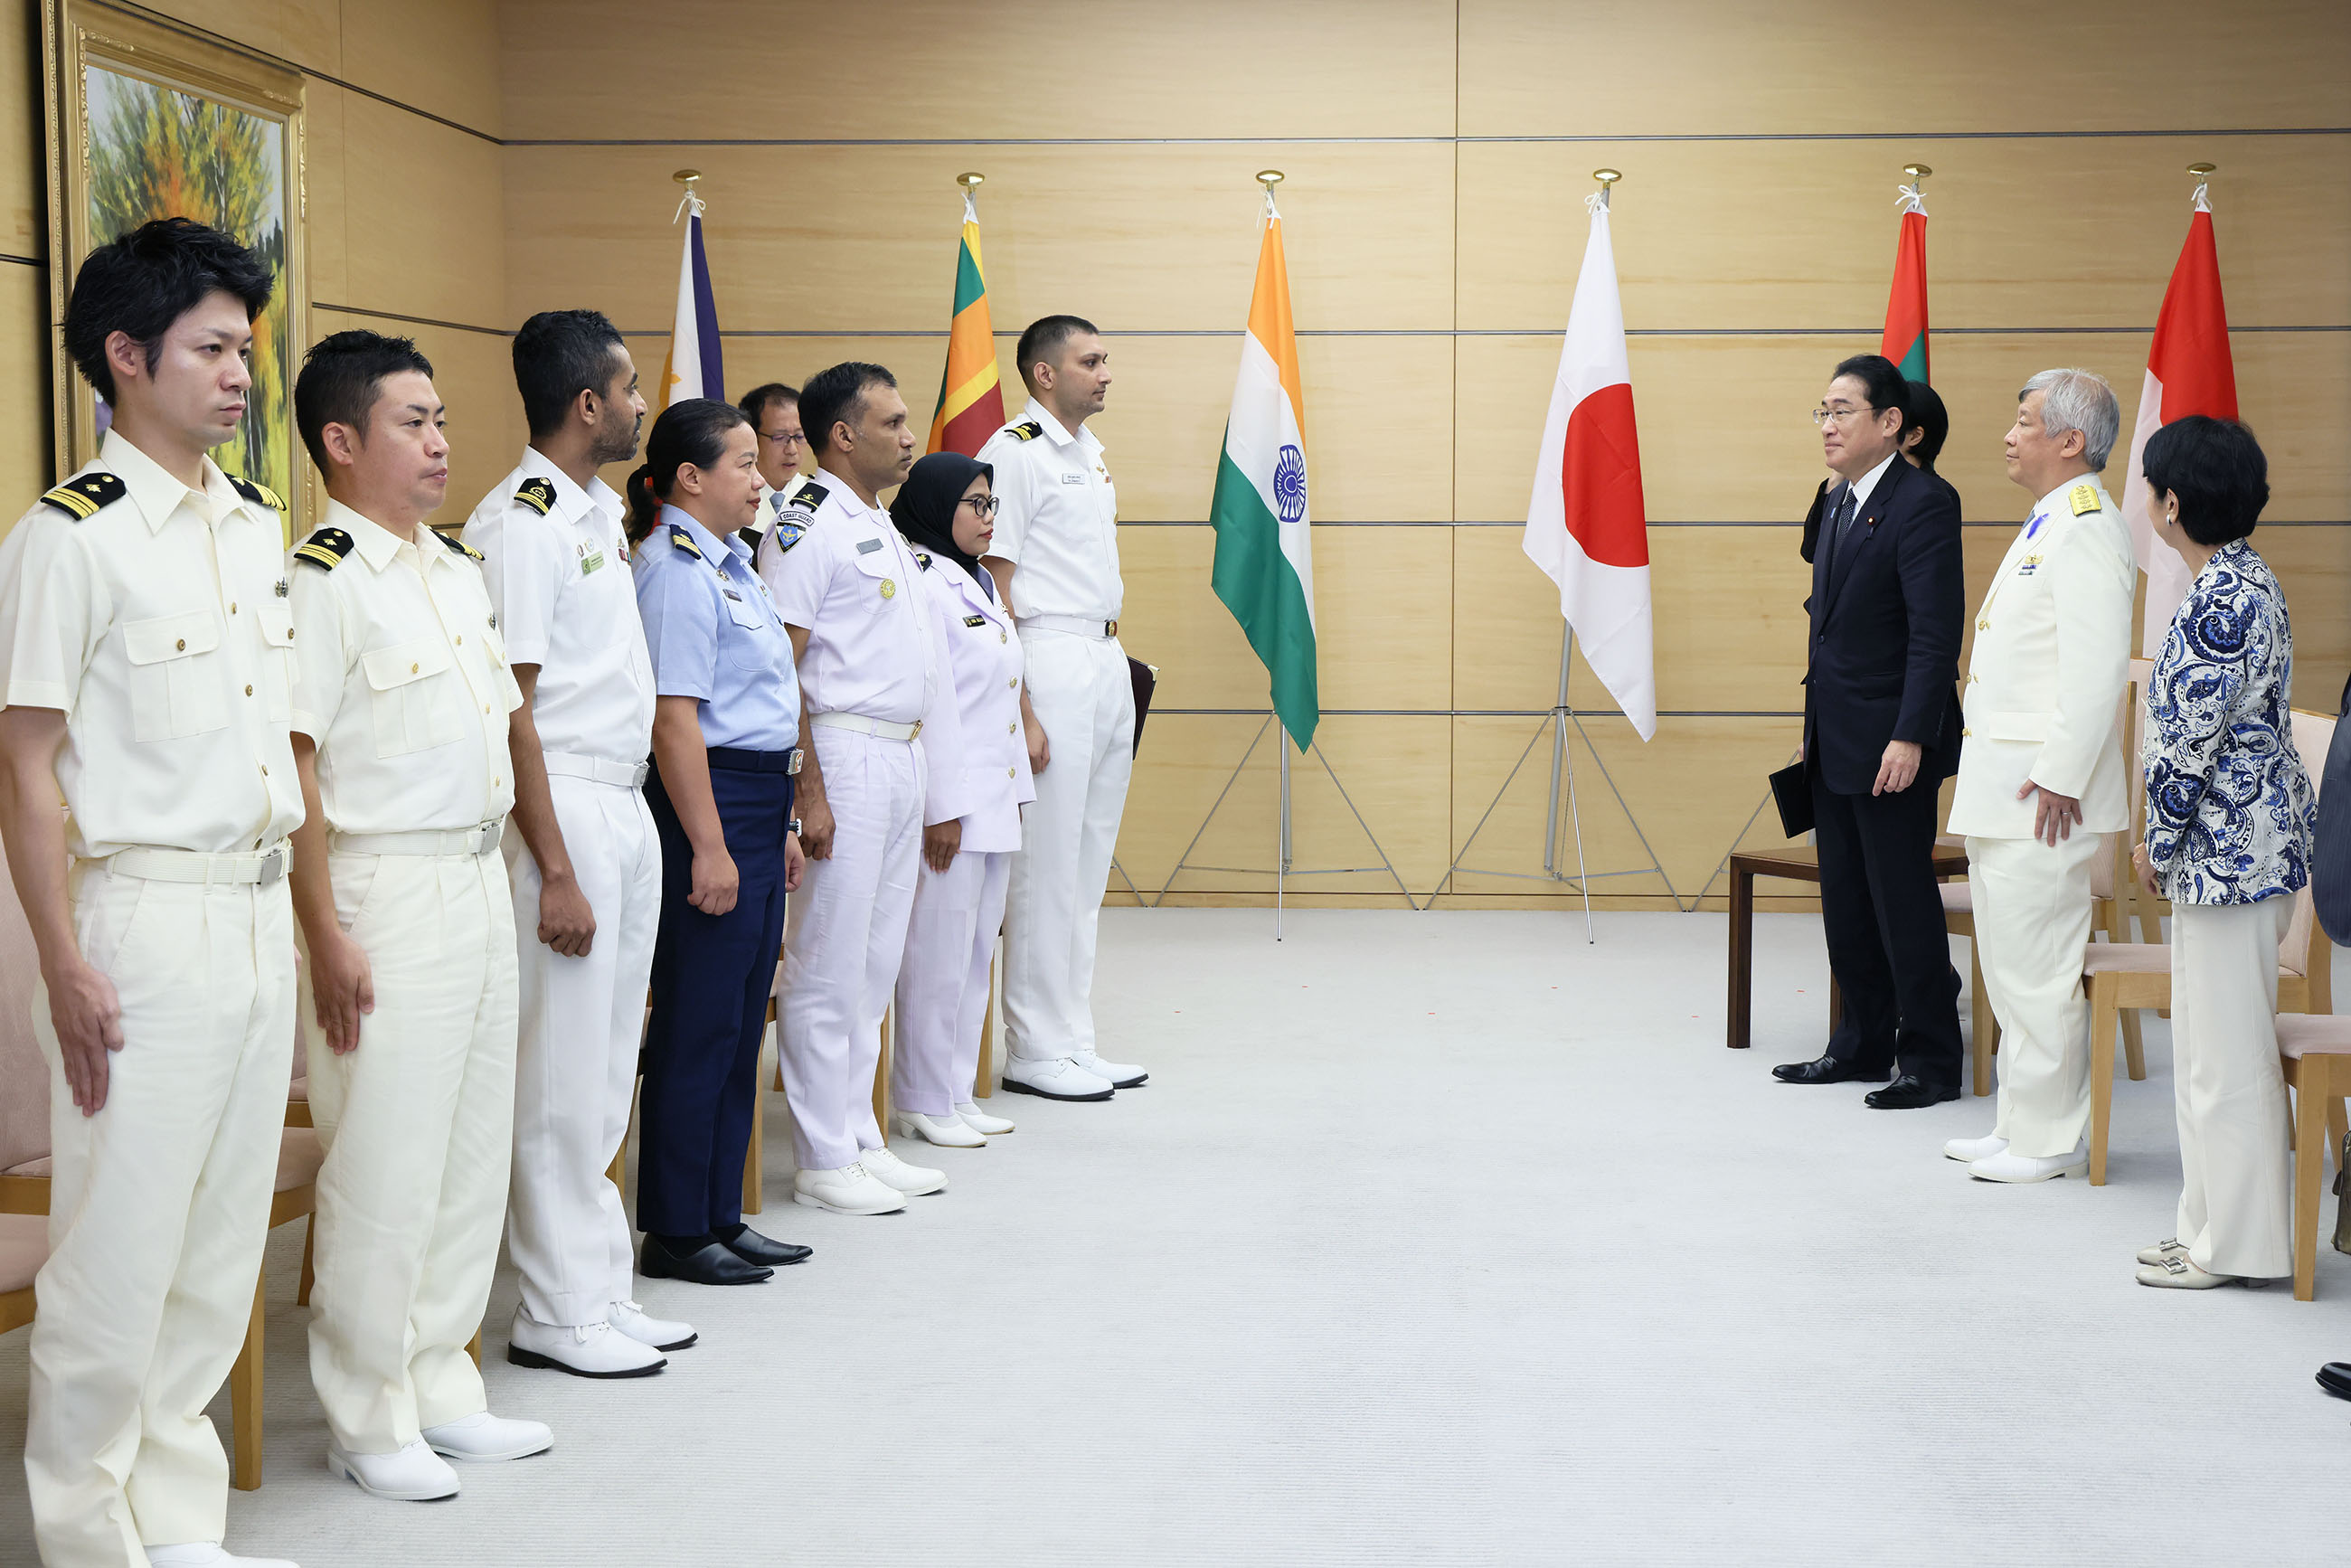 Courtesy Call from the Students of the Eighth Maritime Safety and Security Policy Program